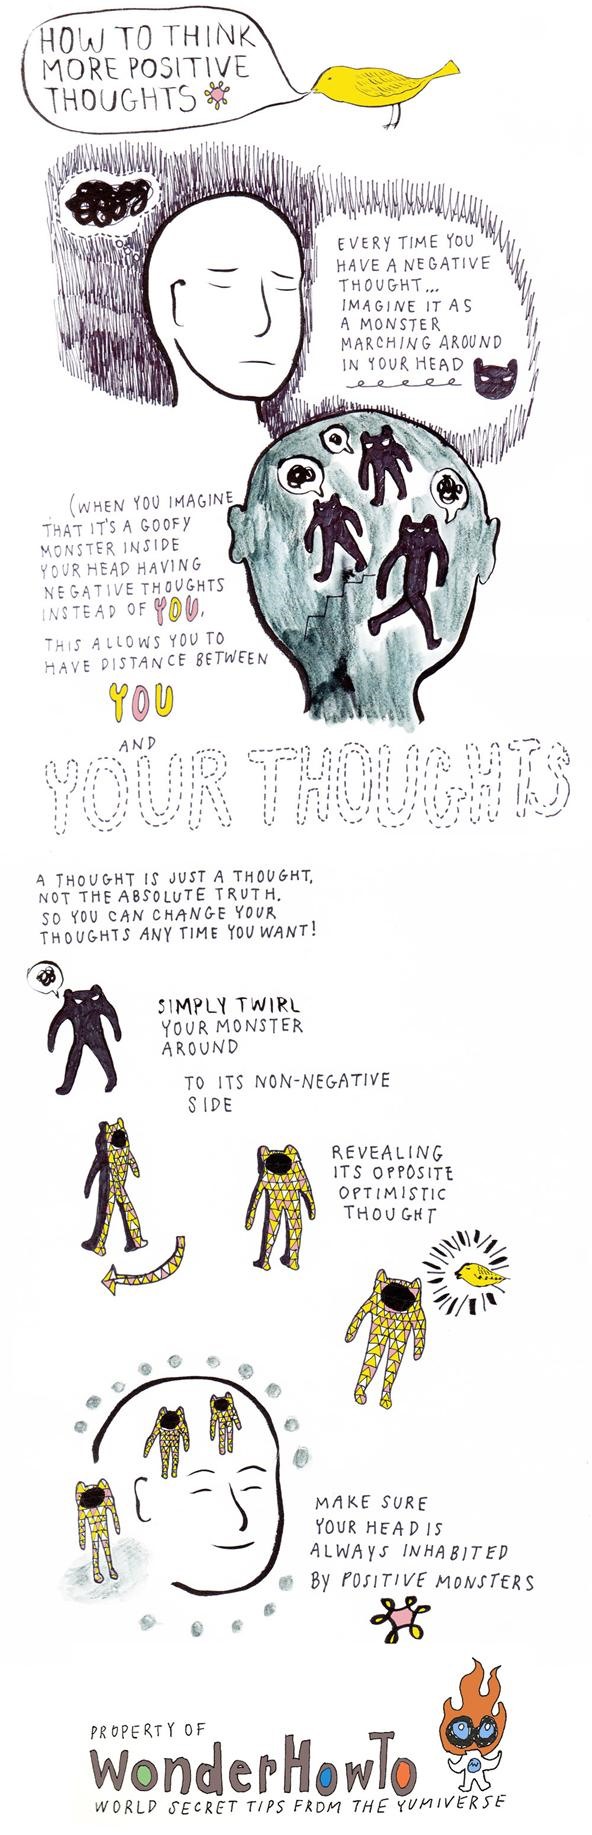 How to Change Negative Thoughts into Positive Ones